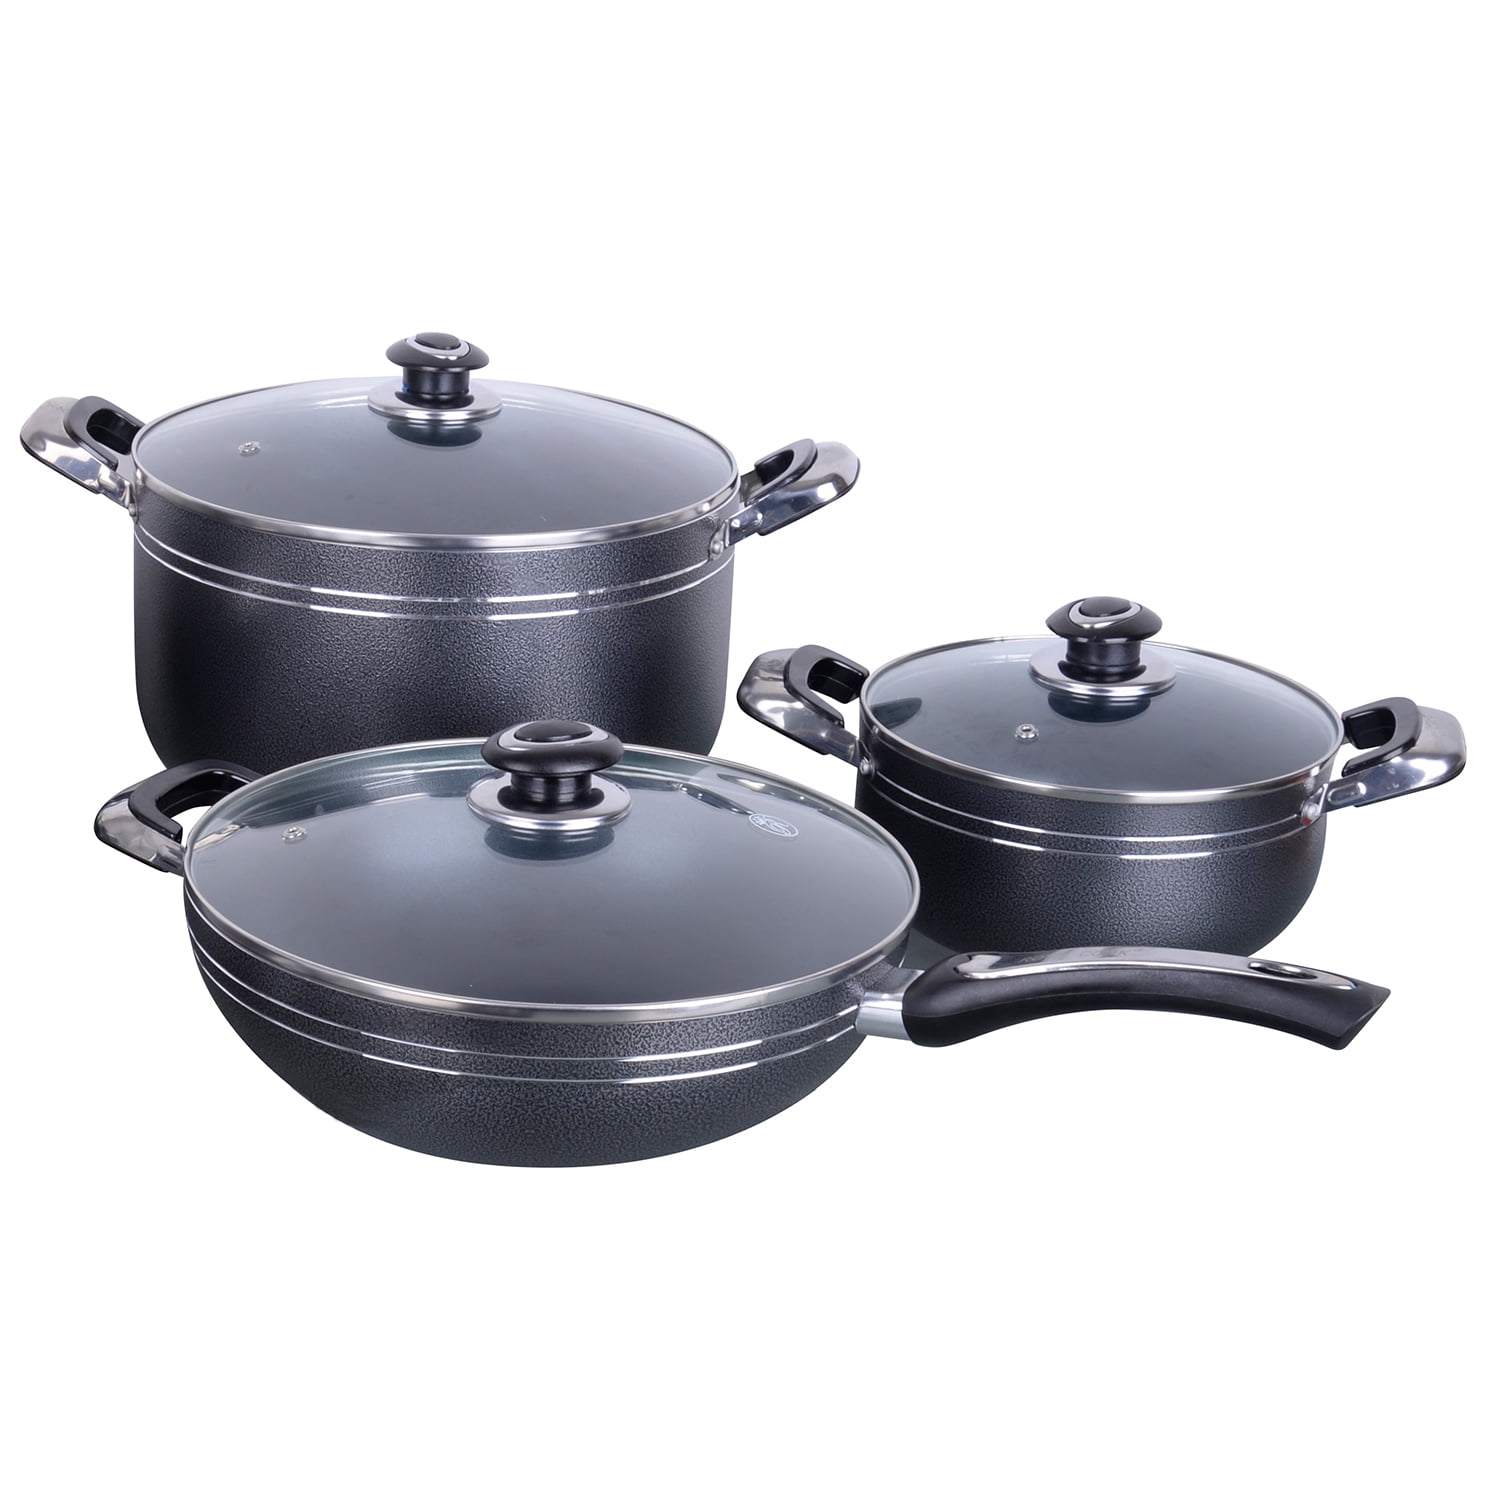 Royalty Line RL-16RGNM: 16 Pieces Premium Stainless Steel Cookware Set